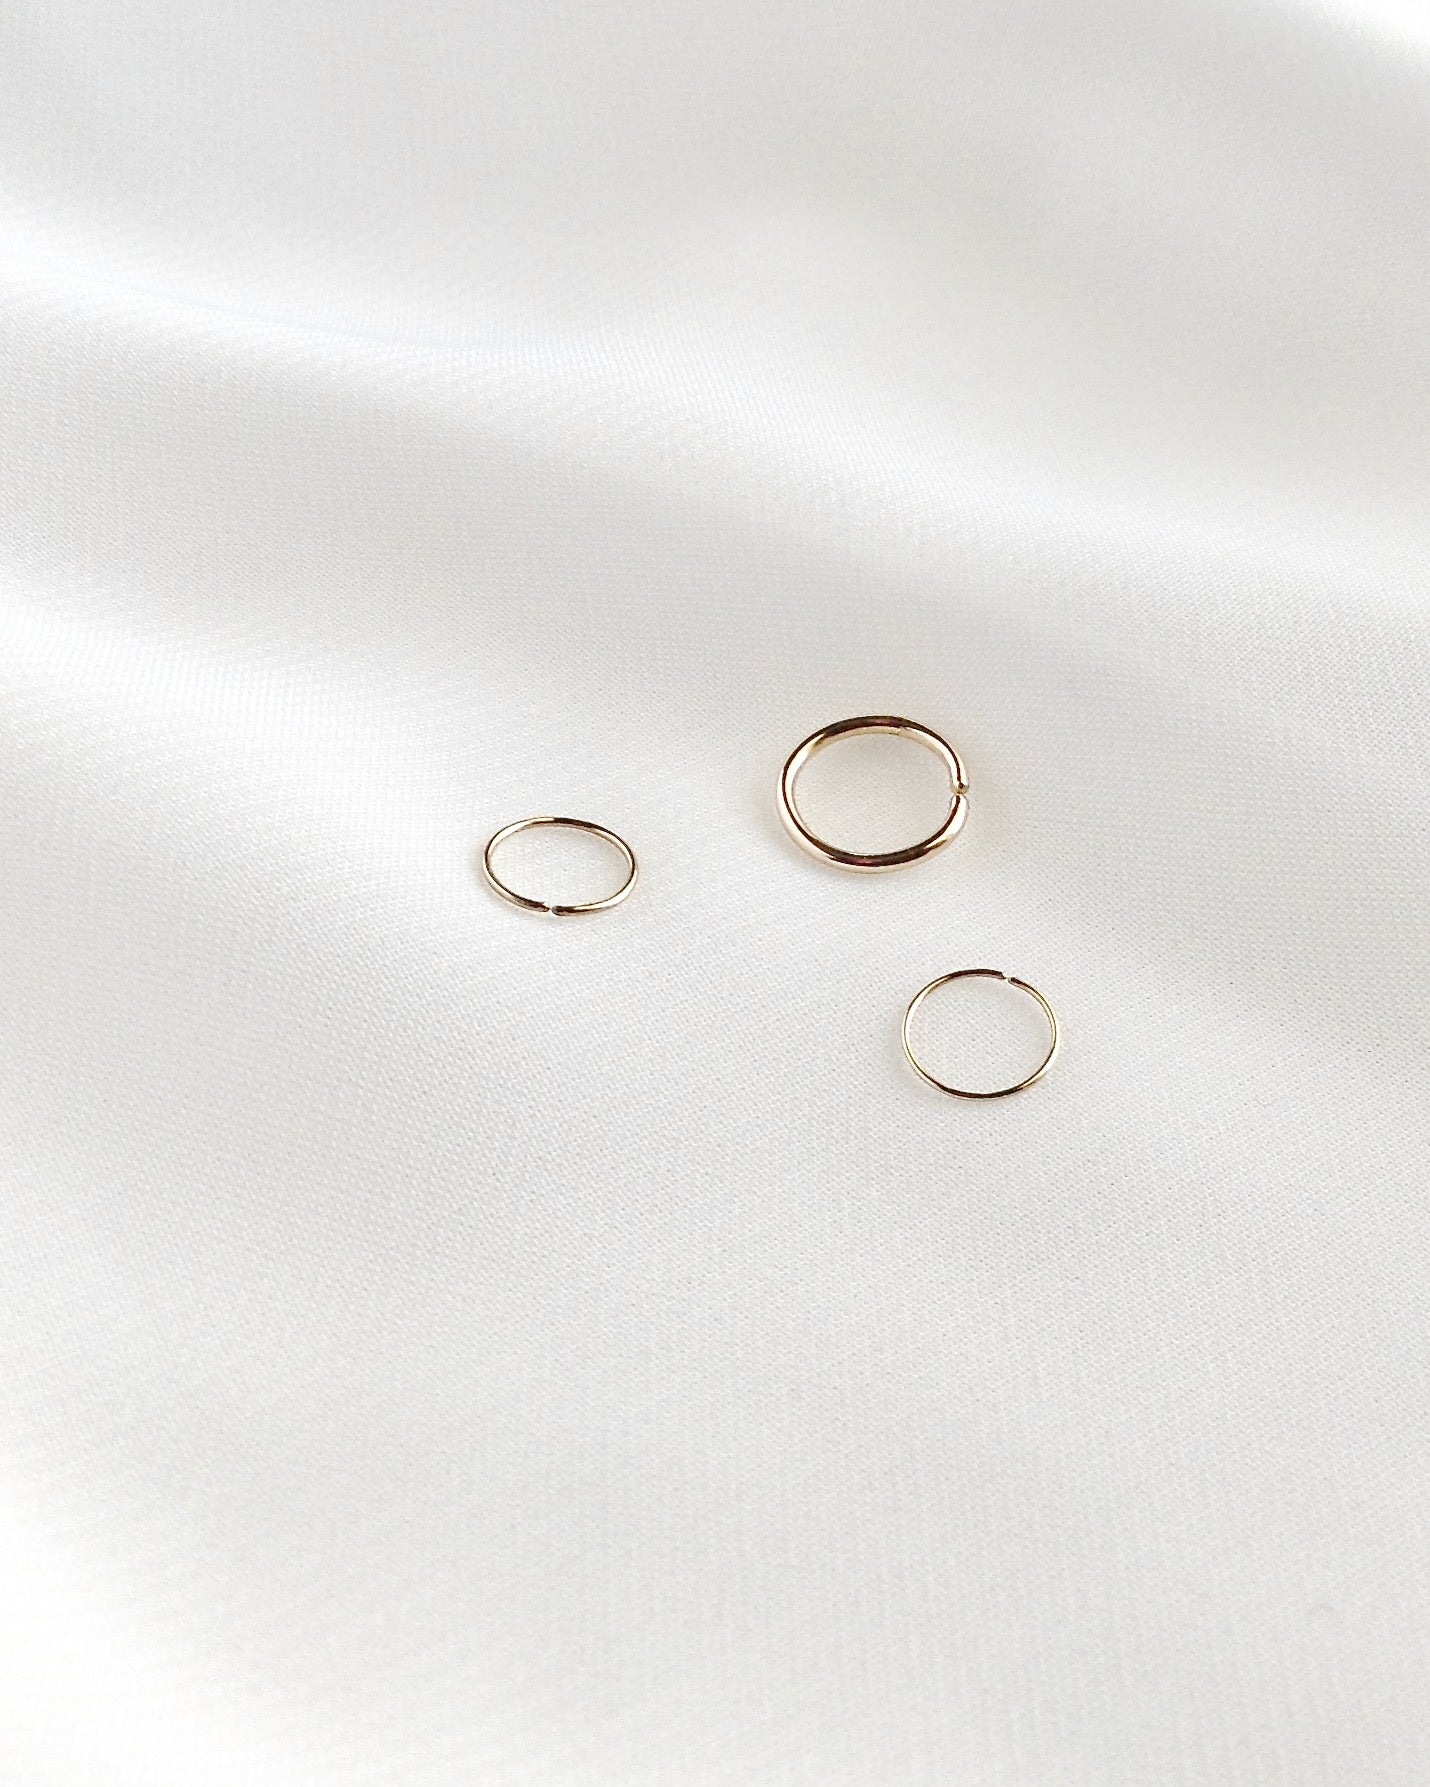 16g 18g 20g 22g 24g 26g Thin Cartilage Helix Hoop Earring | Small Daith Hoop Small Gold Filled Cartilage Hoop | Gold Helix Hoop Earring | Cartilage Piercing Hoop | Simple Daith or Rook Hoop | IB Jewelry